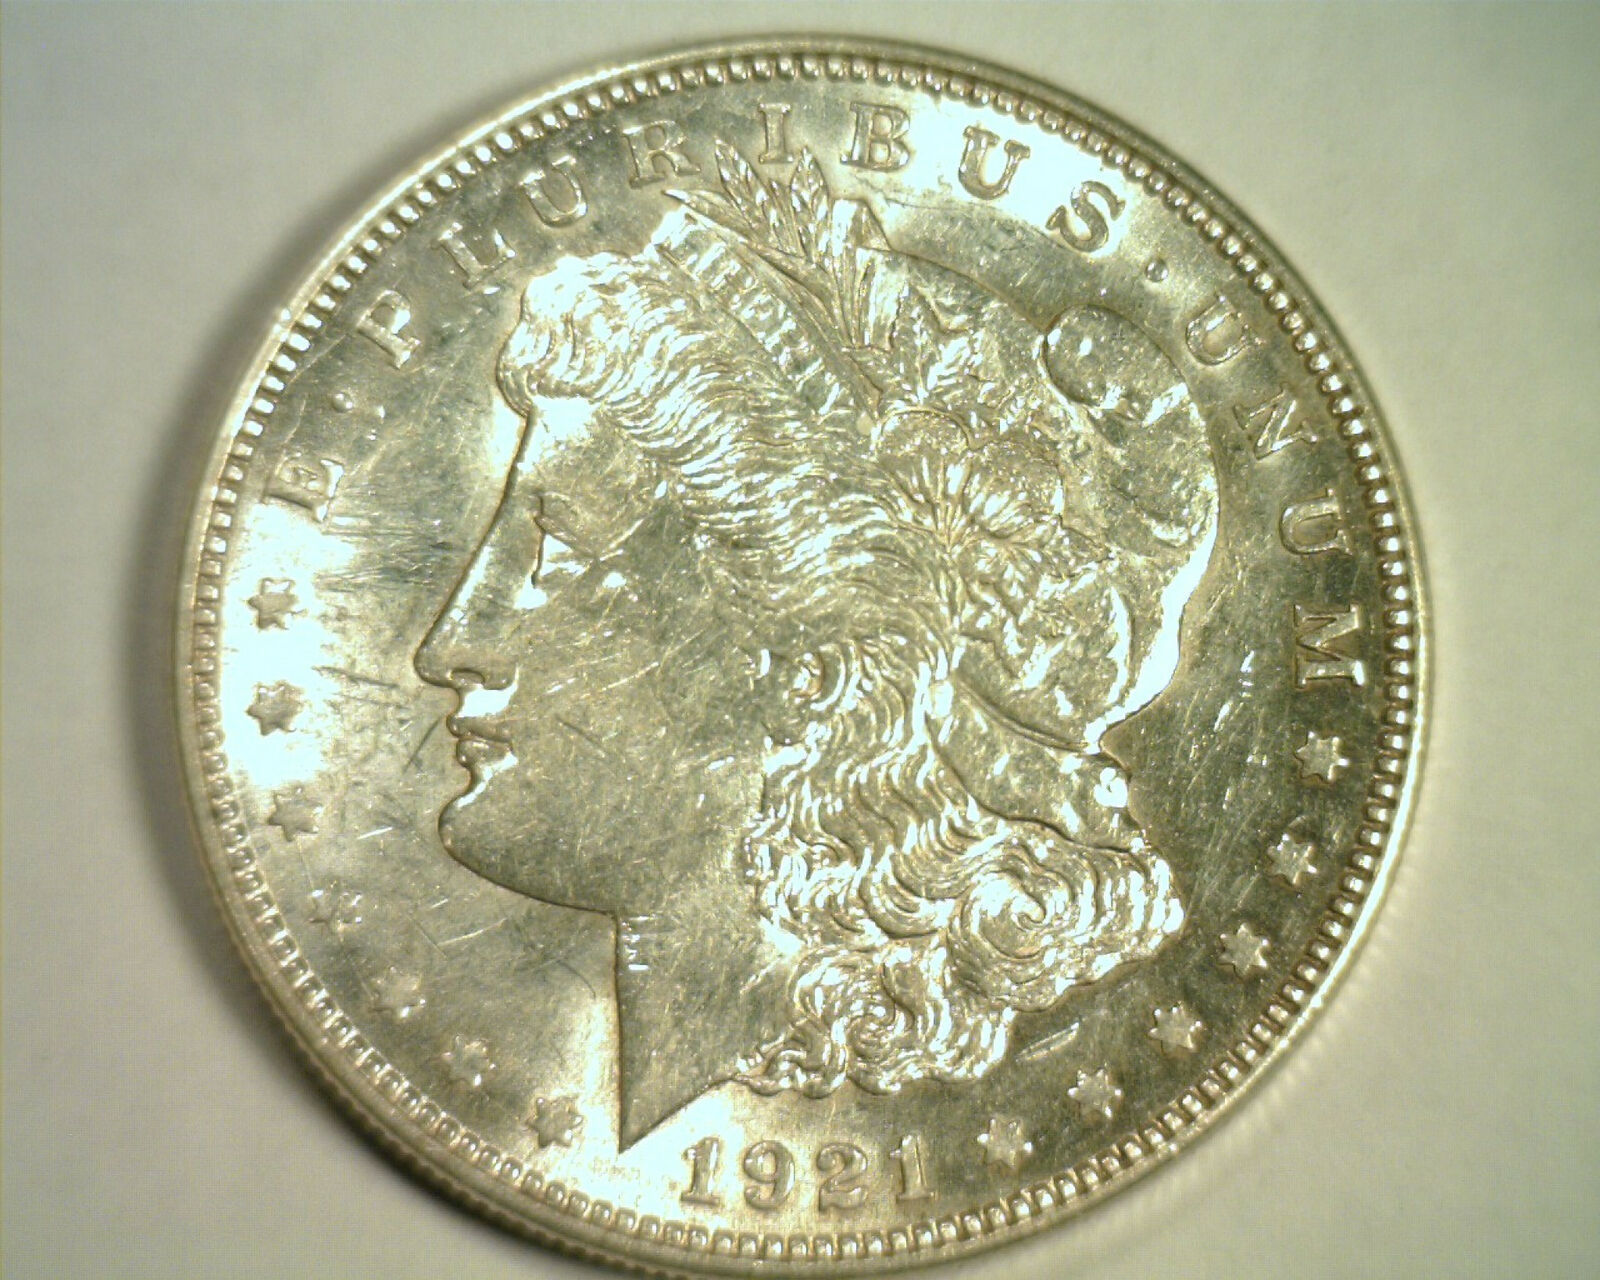 Primary image for 1921-D MORGAN SILVER DOLLAR CHOICE ABOUT UNCIRCULATED CH AU NICE ORIGINAL COIN